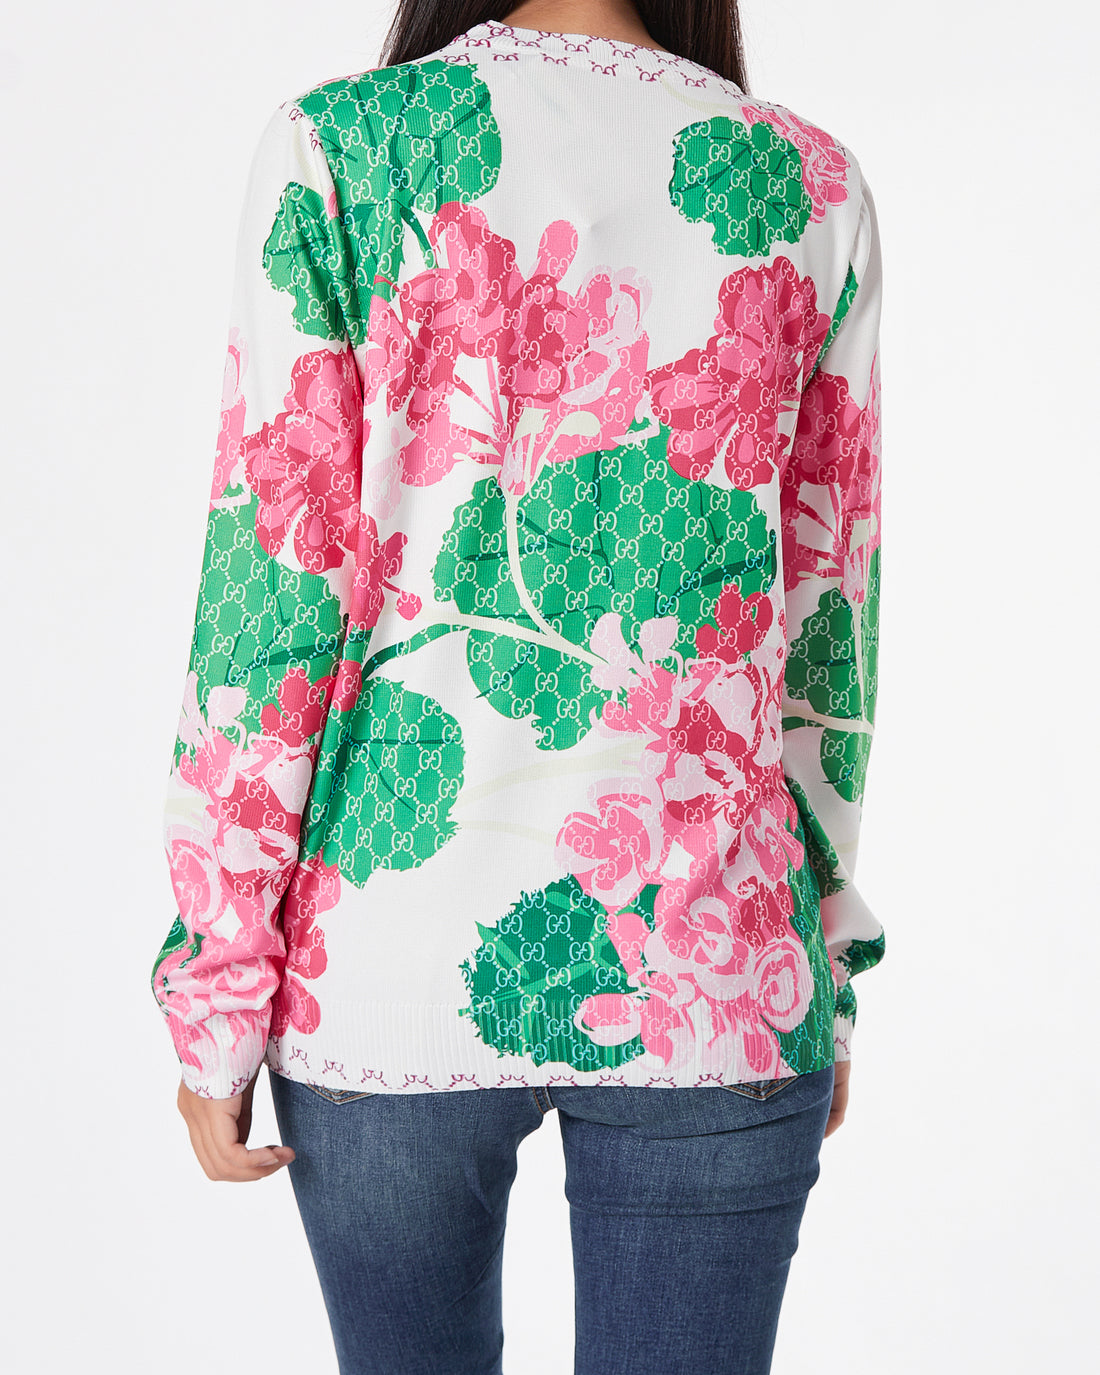 GUC Floral Over Printed Lady  Sweater 22.90